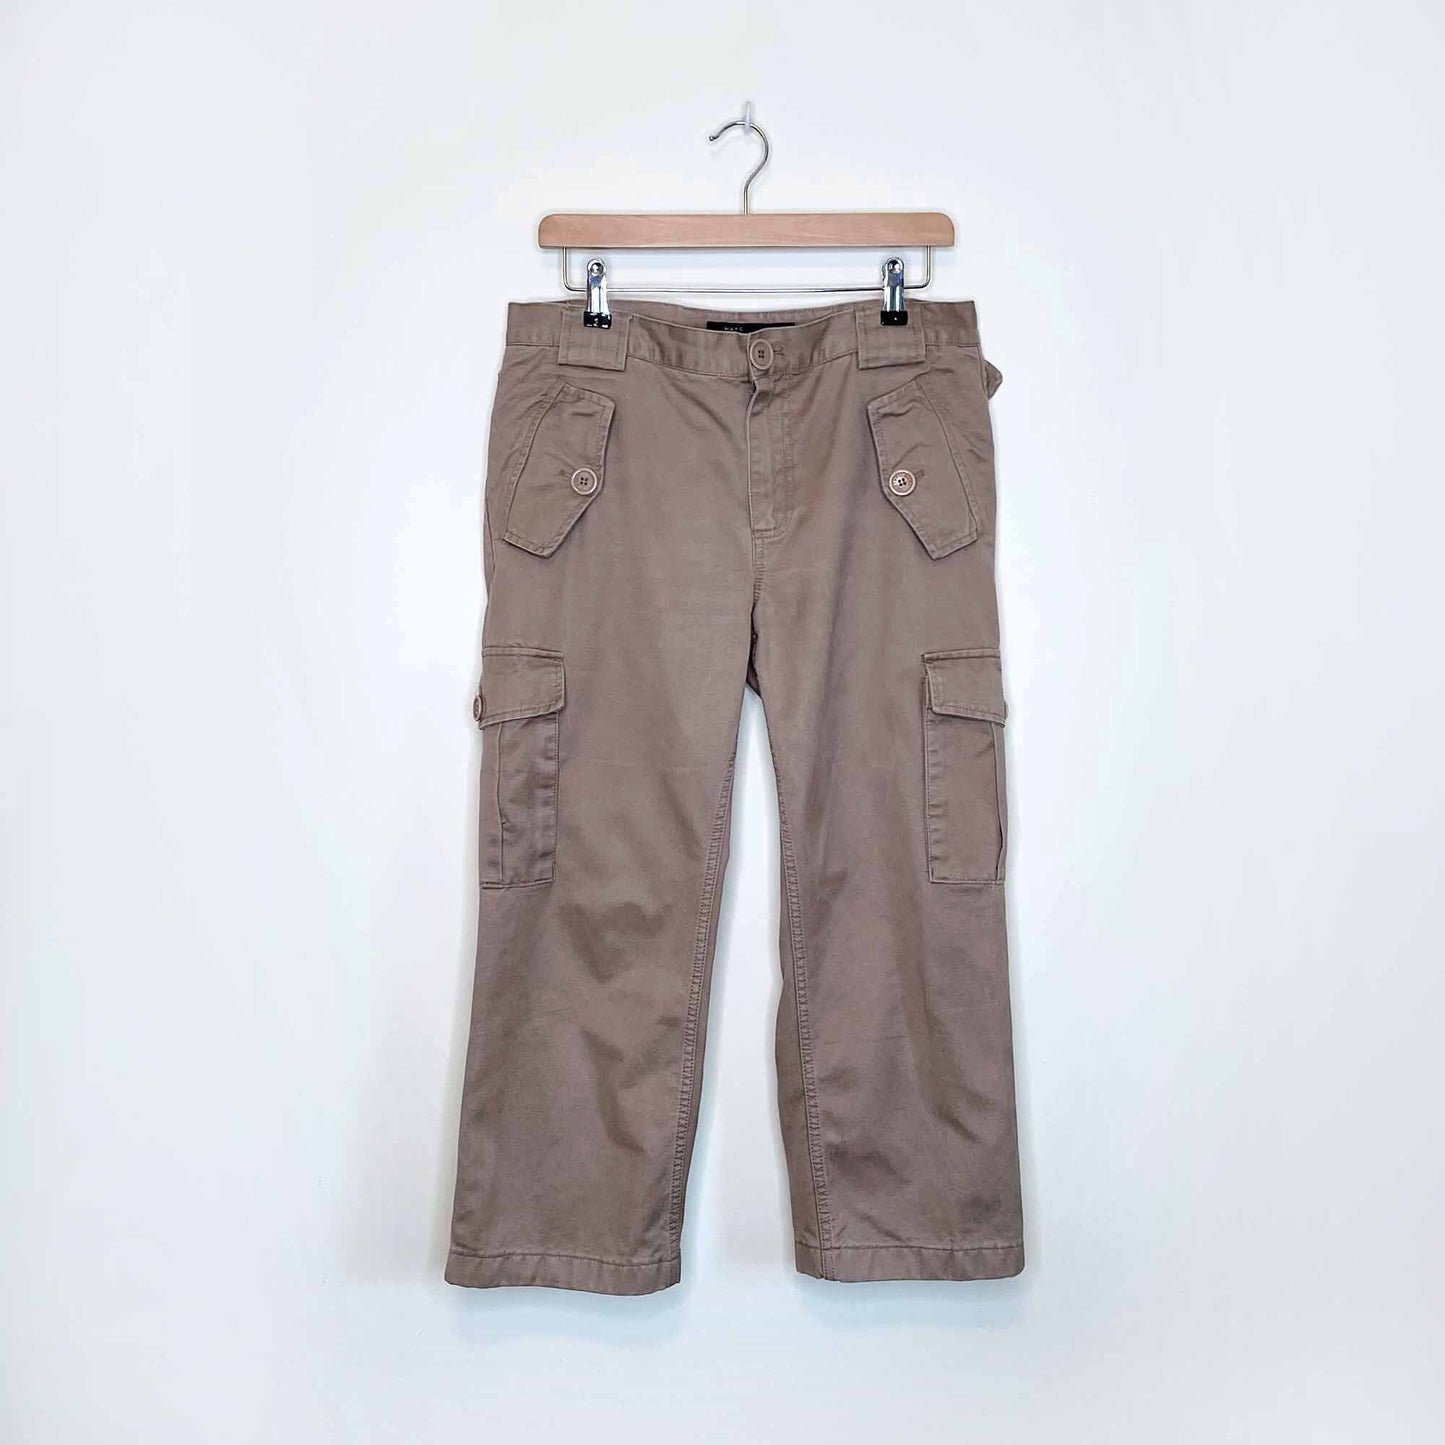 marc jacobs cropped wide leg cargo pants - size 10